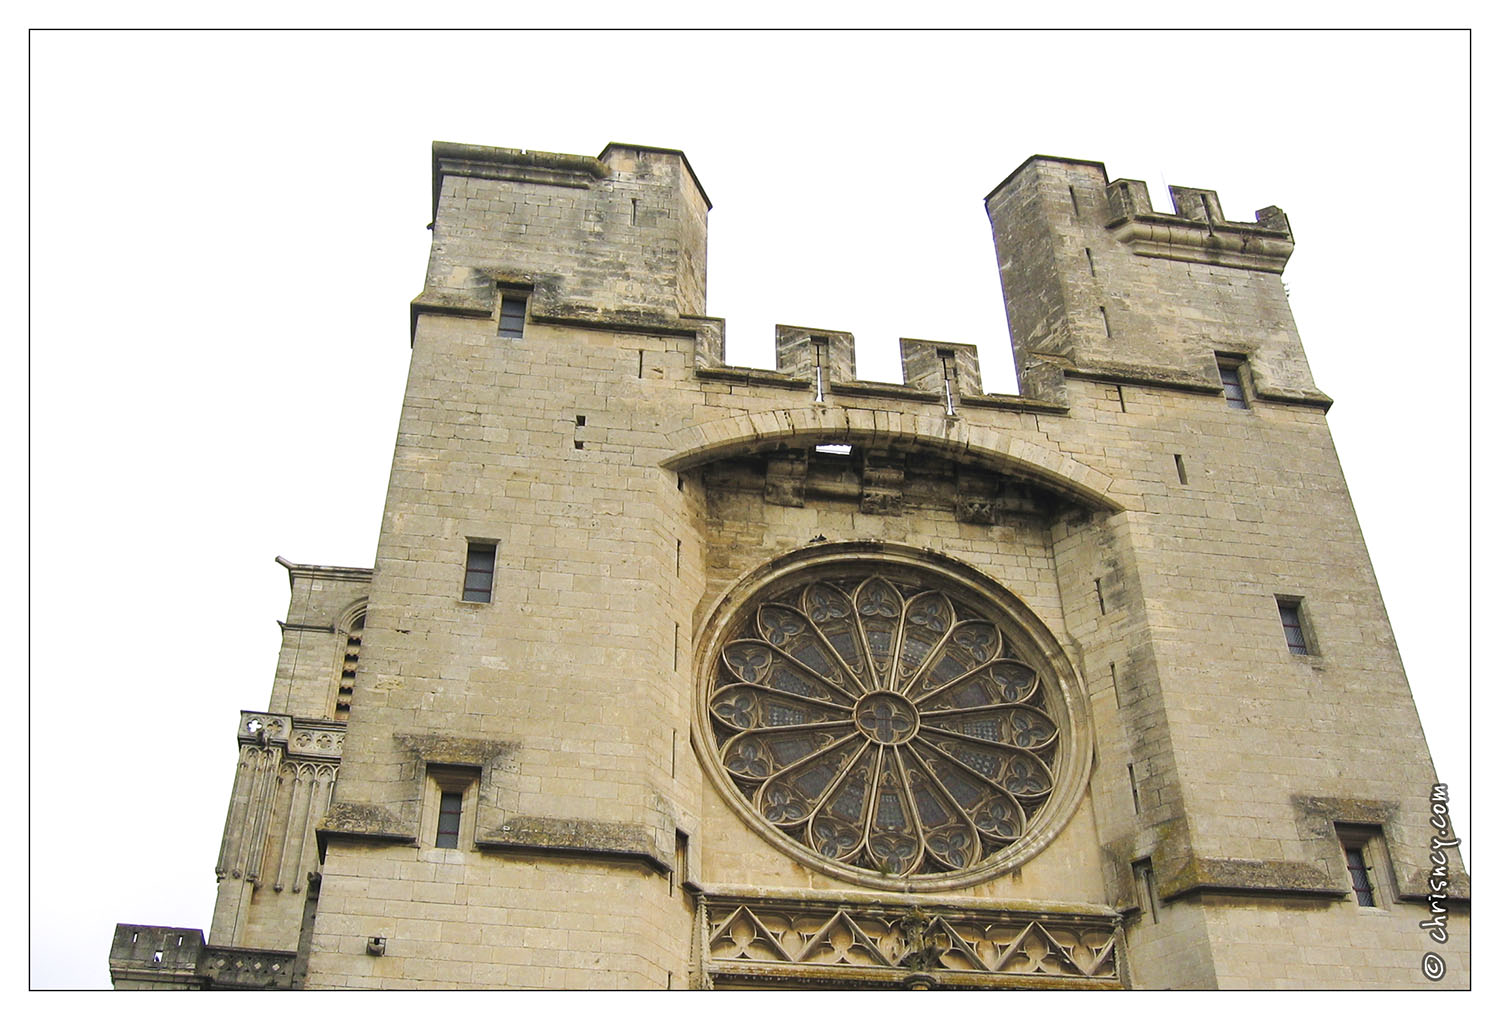 20040913-0517-Beziers_cathedrale_St_nazaire_w.jpg